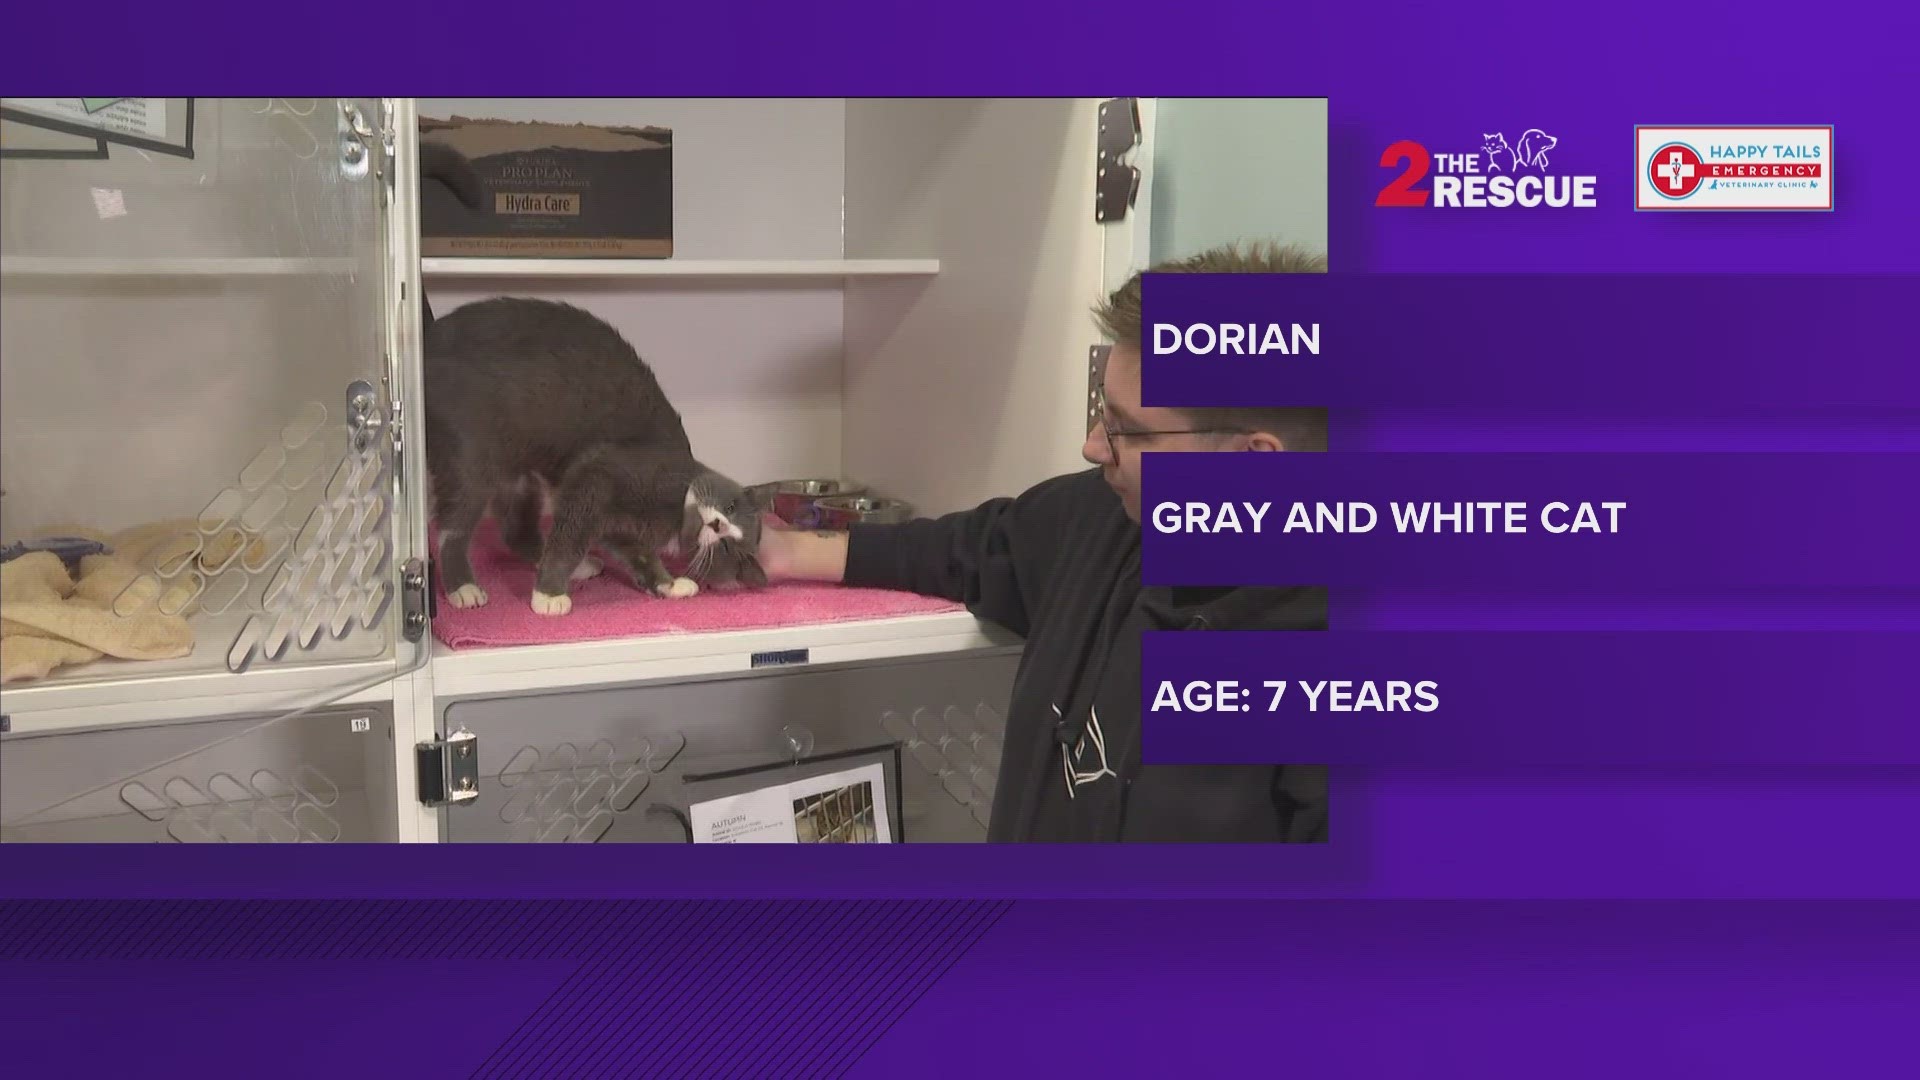 Dorian is a seven-year-old gray and white cat who is affectionate and loves scratches. He is content to be petted and relax.